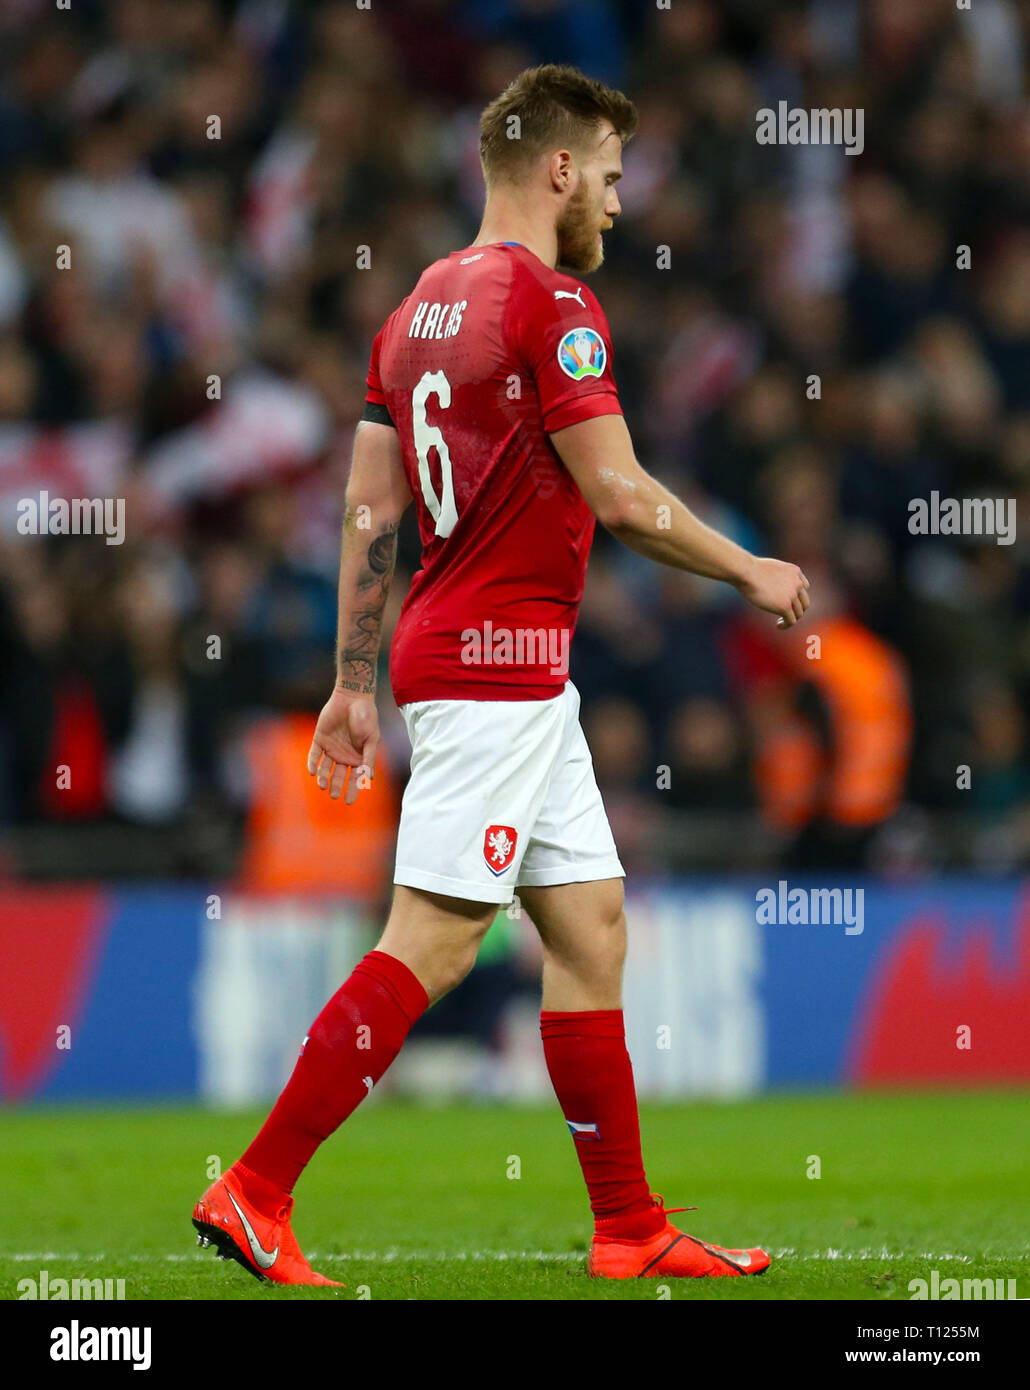 Czech Republic's Tomas Kalas shows his dejection after scoring an own goal during the UEFA Euro 2020 Qualifying, Group A match at Wembley Stadium, London. Stock Photo